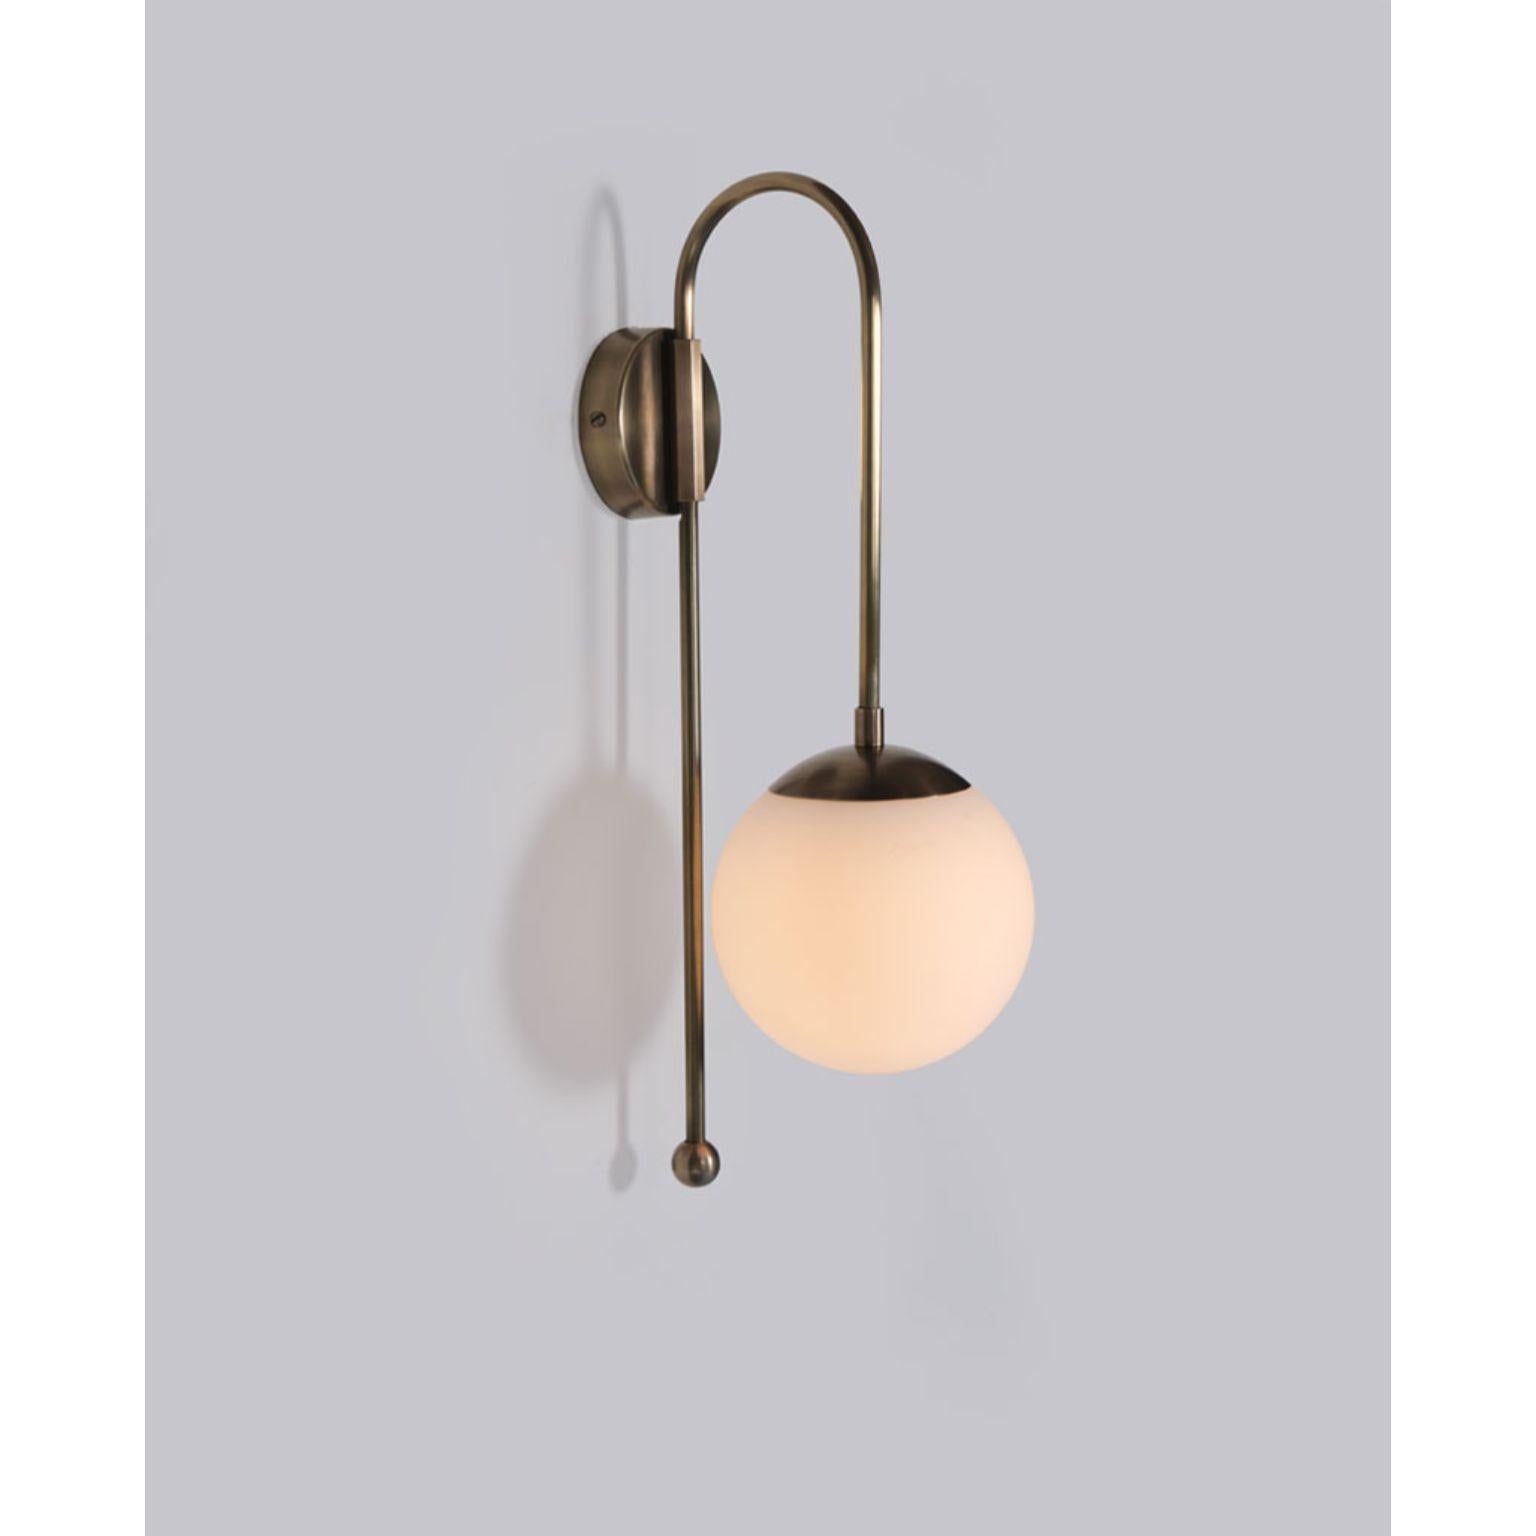 A Glass Dome Wall Sconce by Lamp Shaper
Dimensions: D 15.5 x W 22 x H 48.5 cm.
Materials: Brass and glass.

Different finishes available: raw brass, aged brass, burnt brass and brushed brass Please contact us.

All our lamps can be wired according